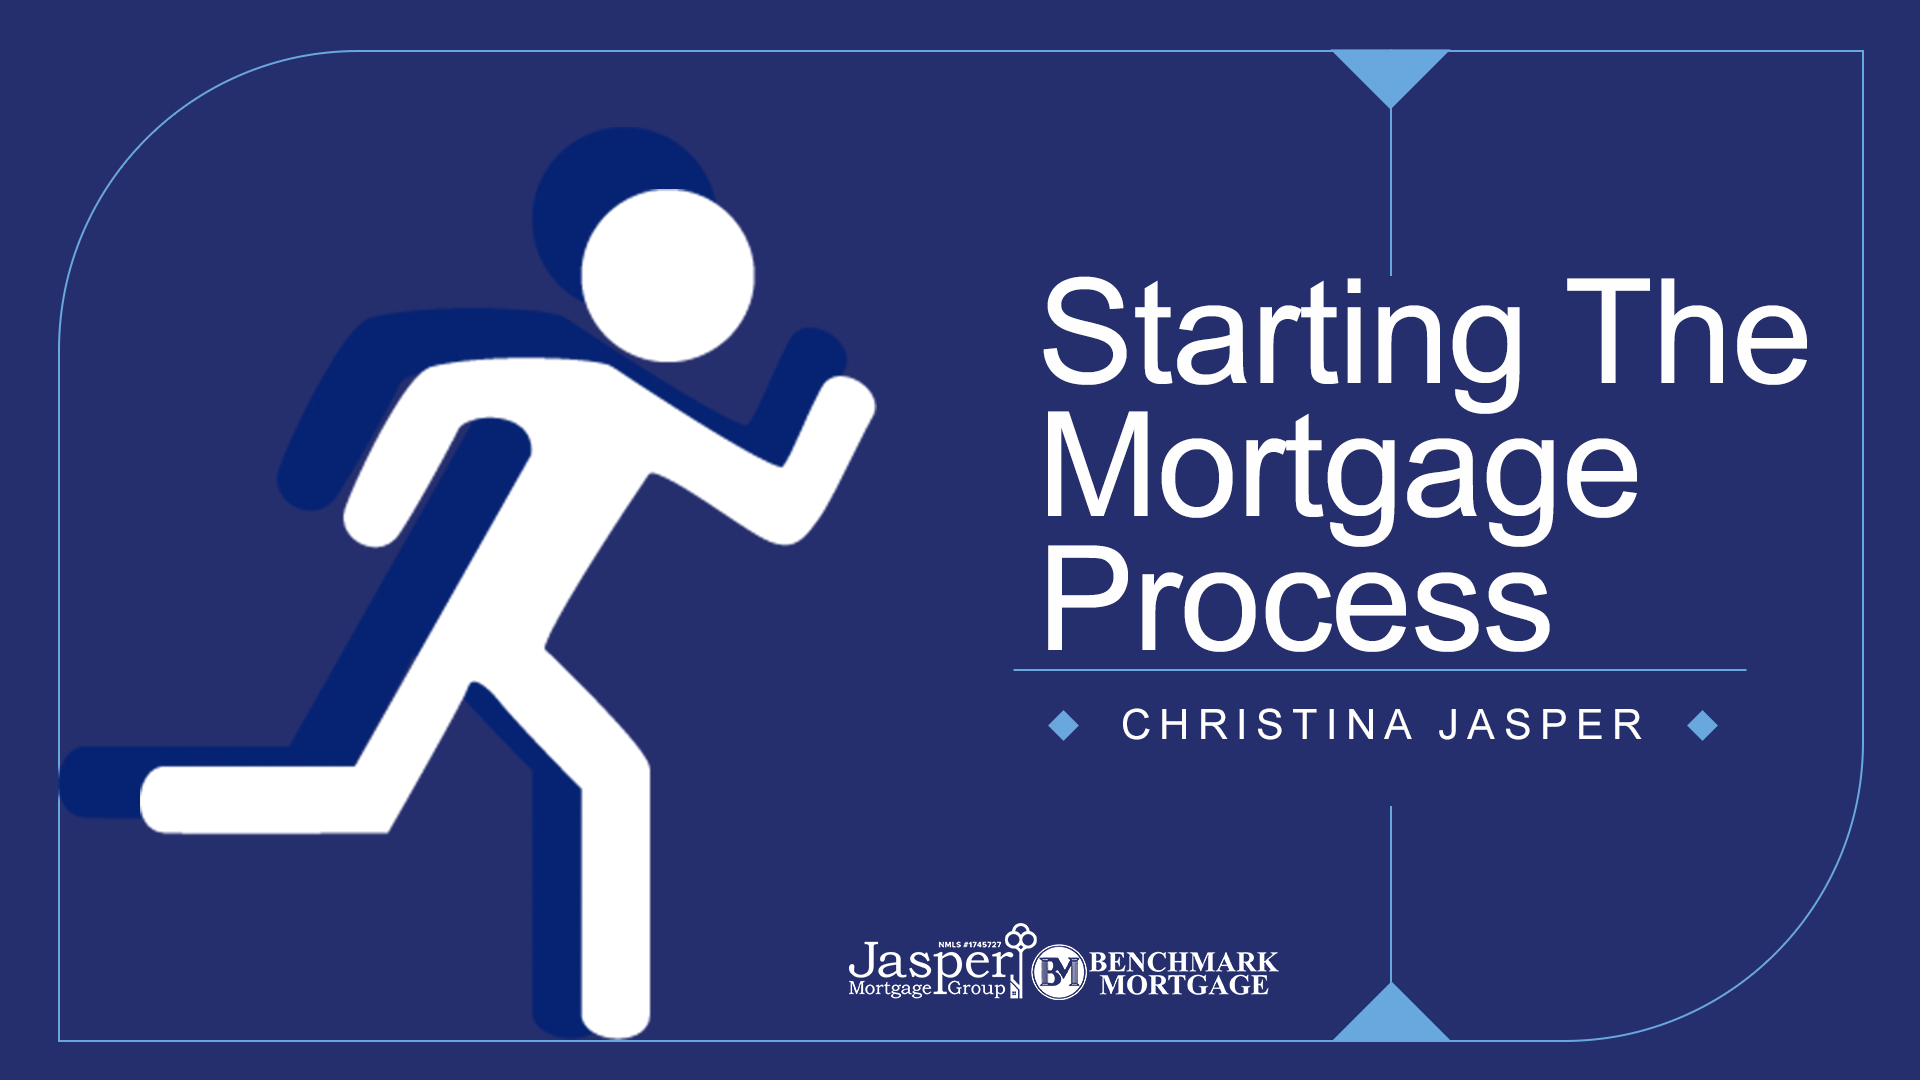 Starting The Mortgage Process